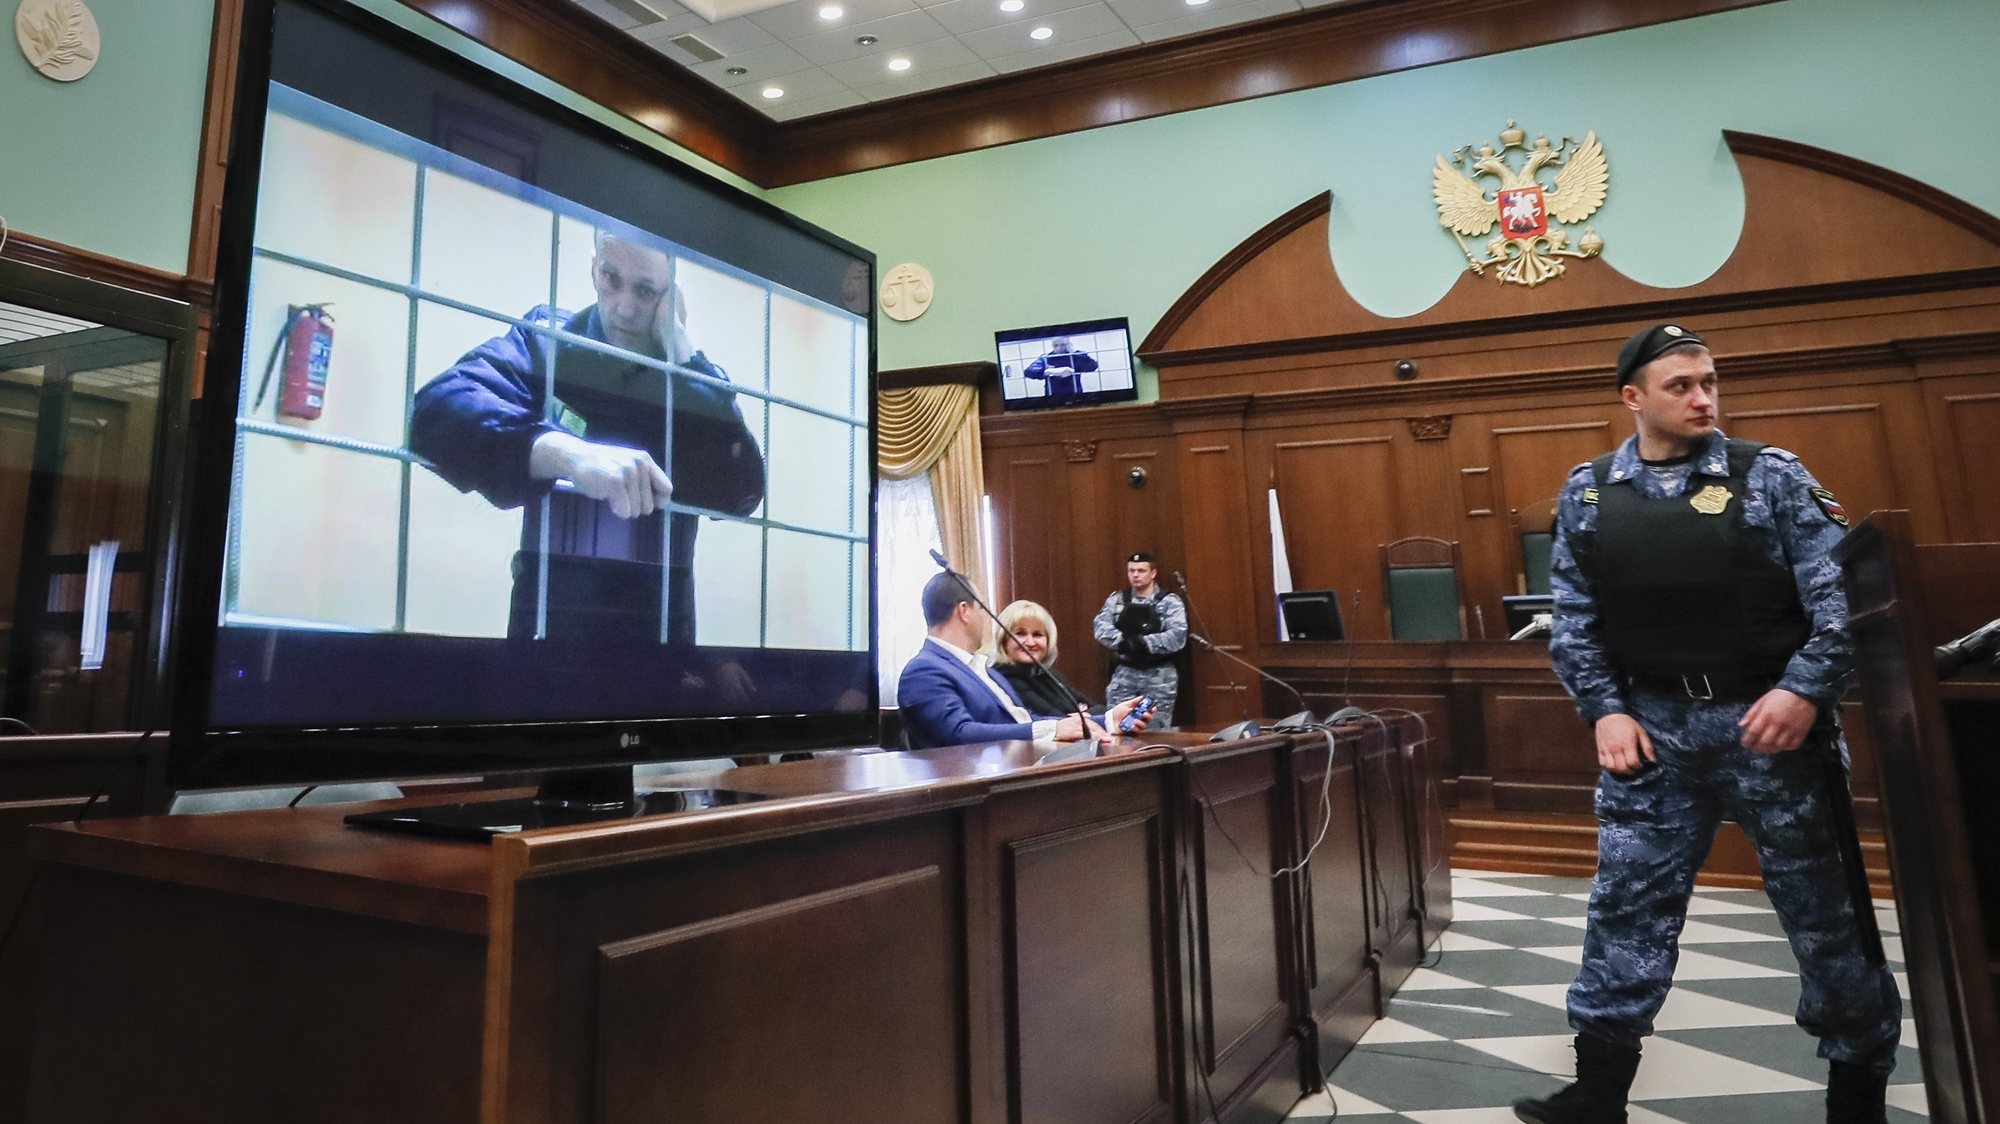 epa10481401 (FILE) - Russian opposition leader Alexei Navalny is shown on a monitor screen via video link from the penal colony No. 2 (IK-2) in Pokrov in Vladimir region, during a hearing of an appeal against Lefortovsky court sentence at the Moscow city court in Moscow, Russia, 24 May 2022 (reissued 21 February 2023). Russian troops on 24 February 2022, entered Ukrainian territory, starting a conflict that has provoked destruction and a humanitarian crisis. One year on, fighting continues in many parts of the country.  EPA/YURI KOCHETKOV  ATTENTION: This Image is part of a PHOTO SET